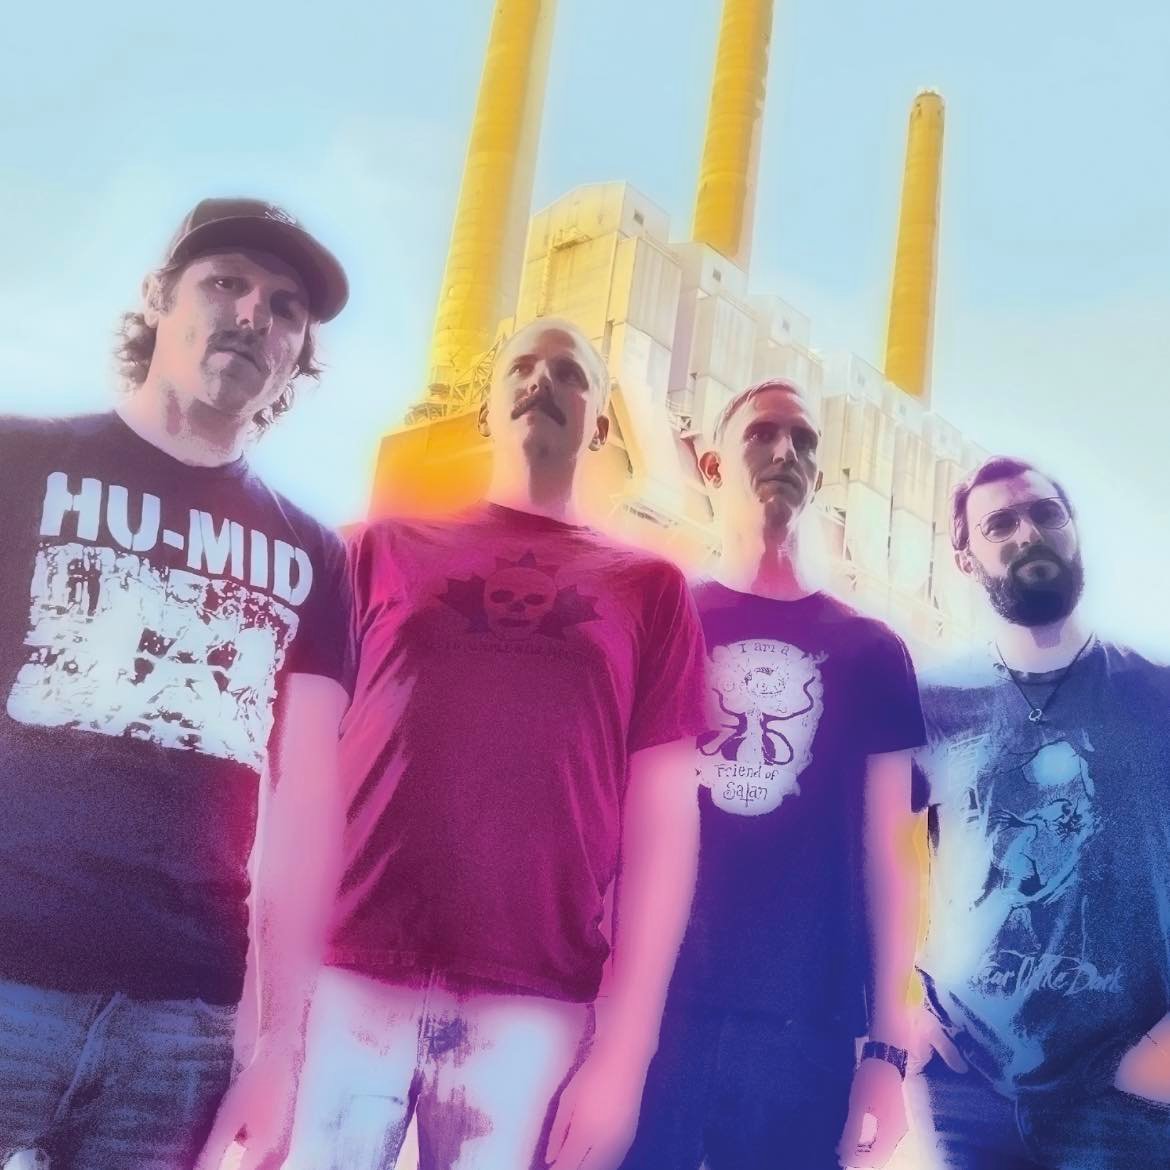 Anvil Crawler, an instrumental progressive rock quartet from Lansing, releases its debut full-length album Friday (Feb. 10). On Saturday, the band hosts its release show at The Avenue Café.